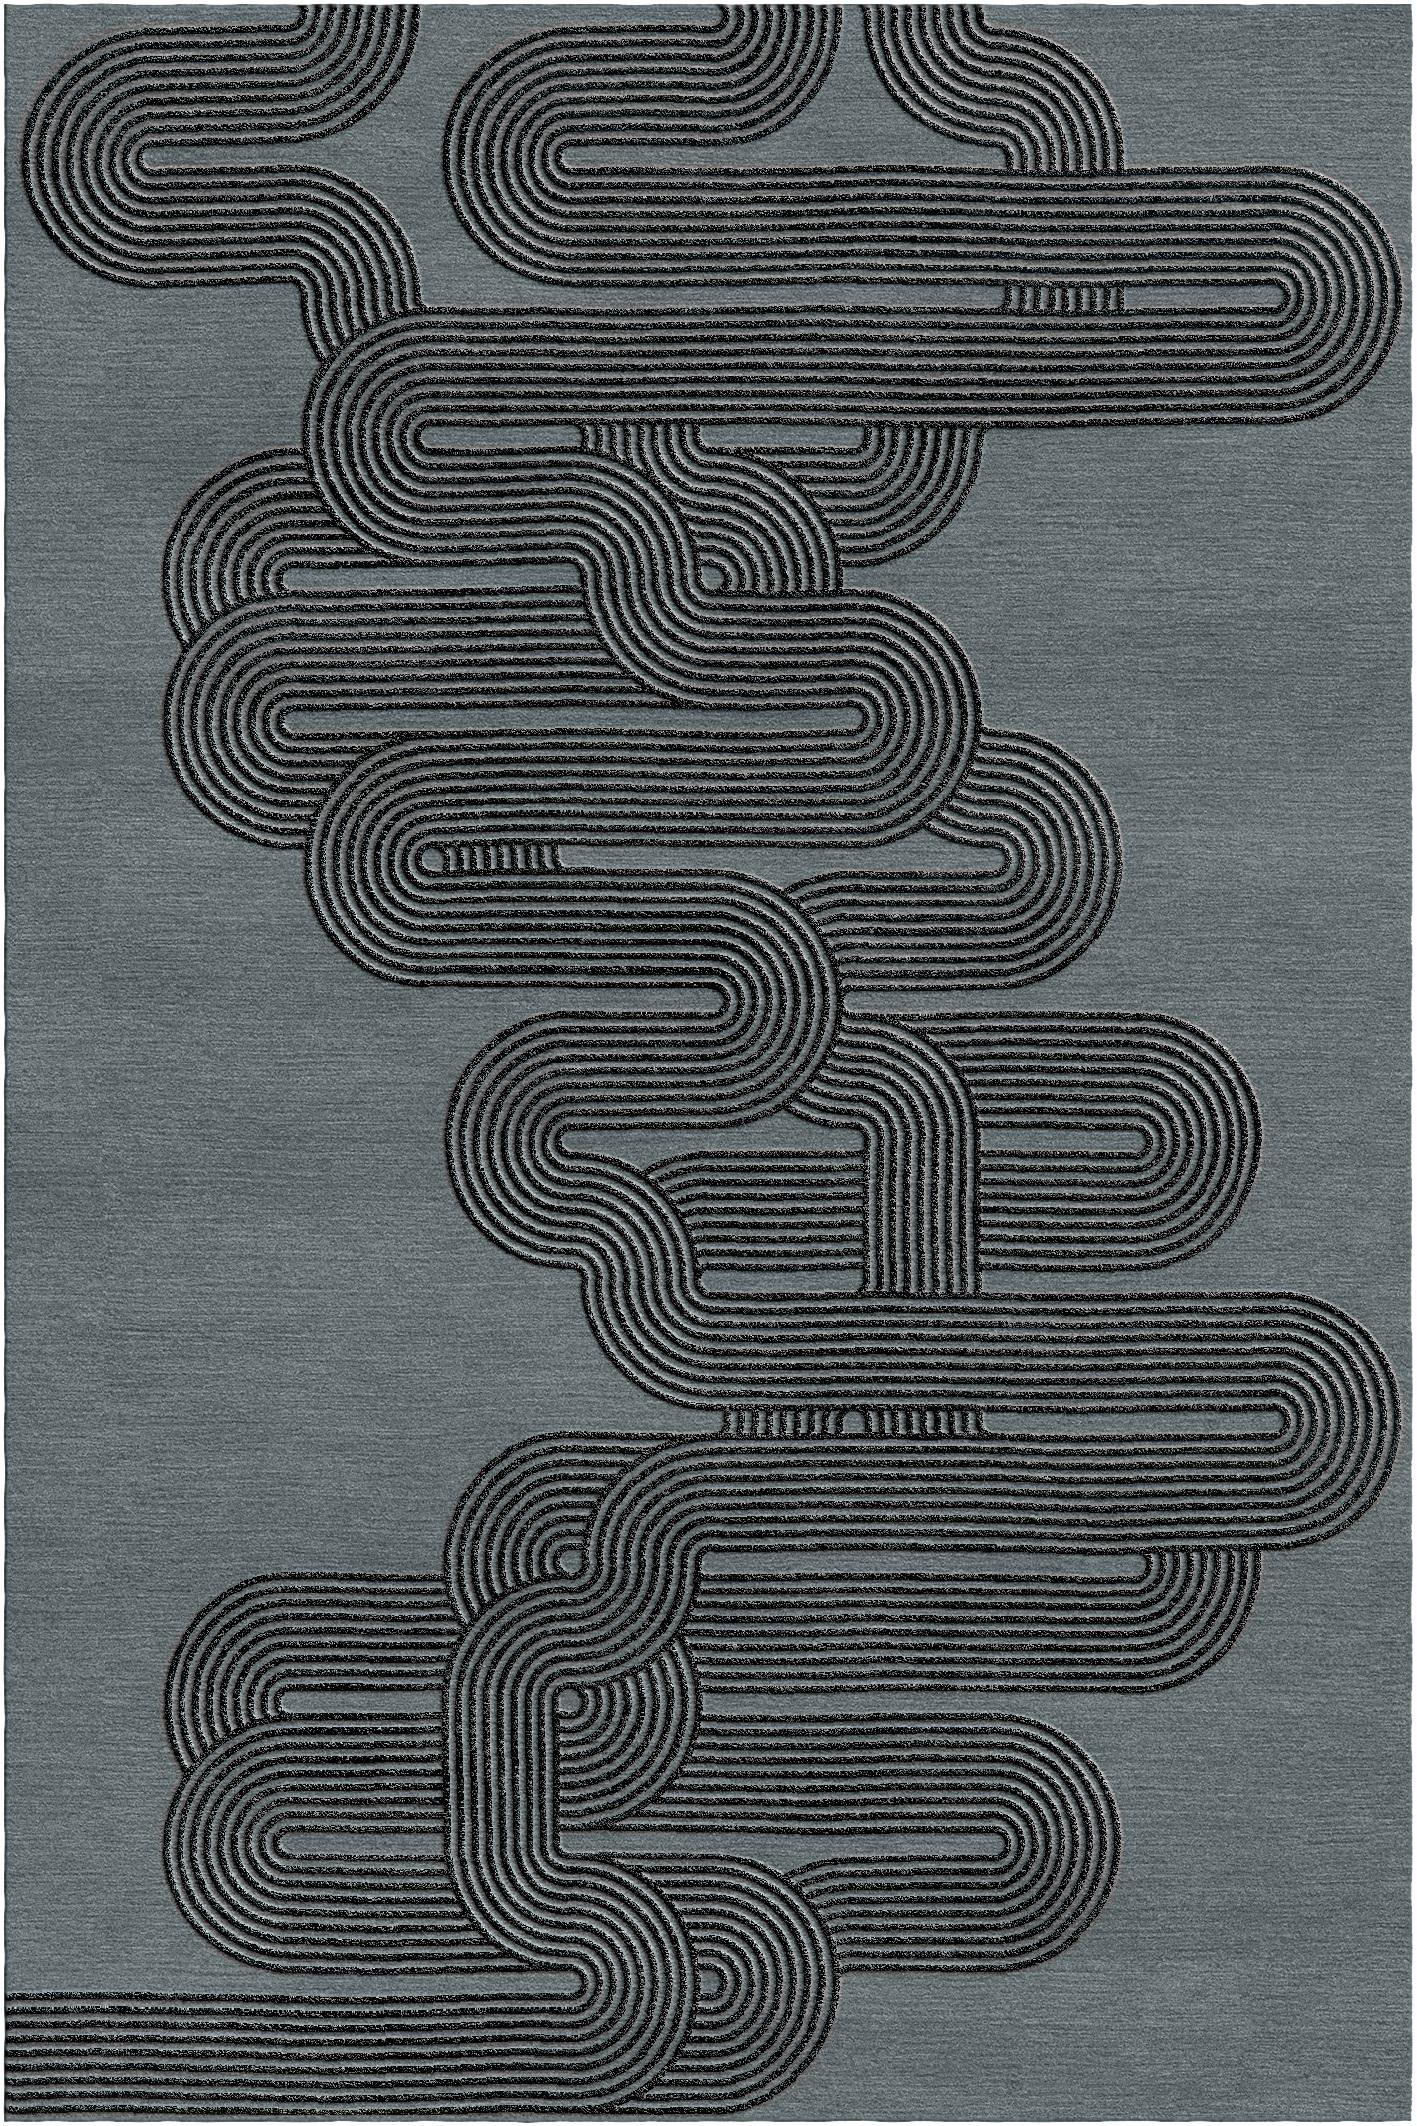 Curve rug II by Giulio Brambilla
Dimensions: D 300 x W 200 x H 1.5 cm
Materials: NZ wool, bamboo silk
Available in other colors.

A striking design of strong visual impact by artist and architect Giulio Brambilla, this rug will make a statement